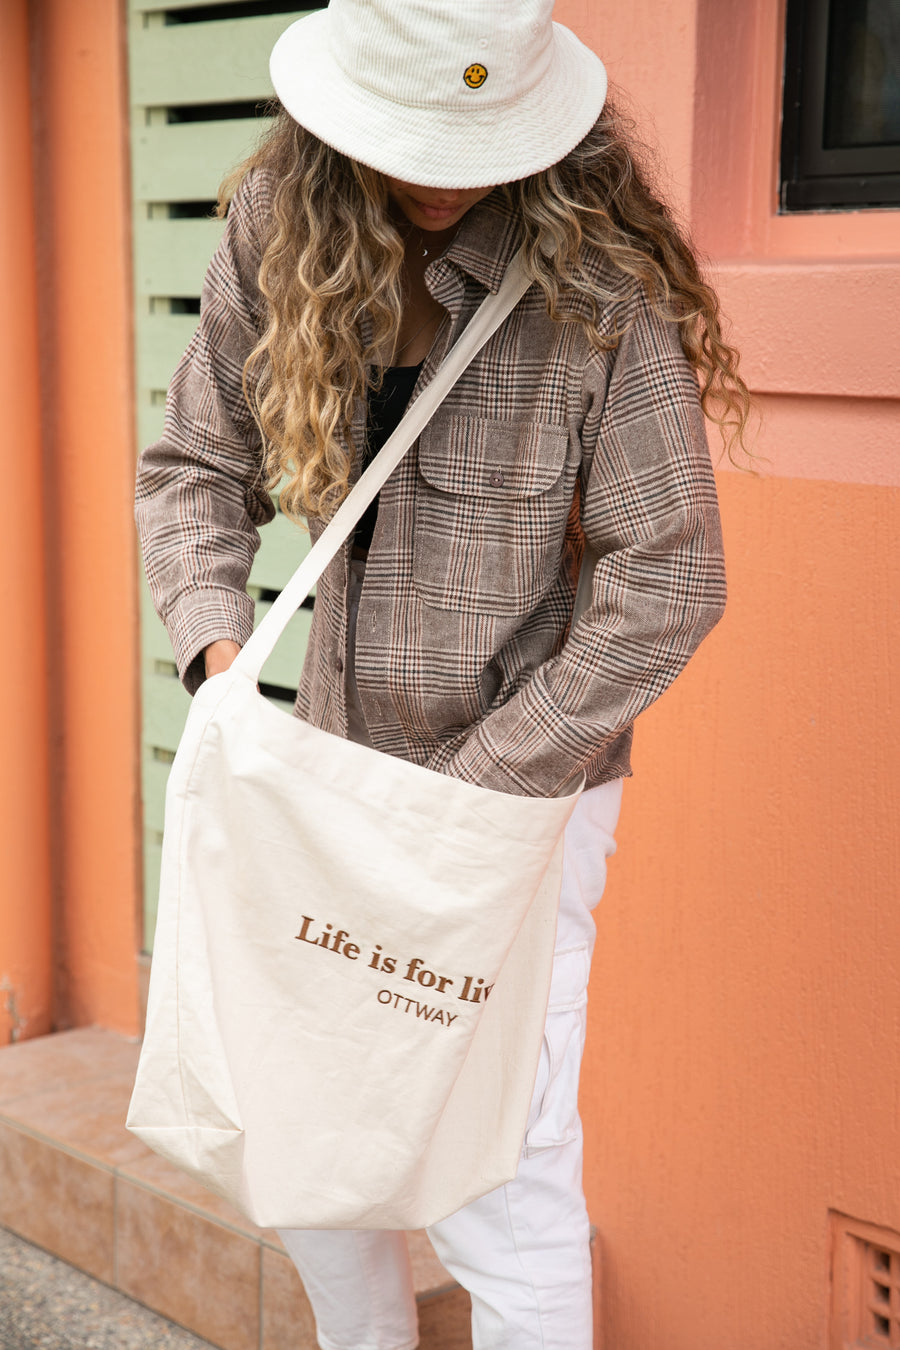 LIFE IS FOR LIVING - OTTWAY TOTE BAG